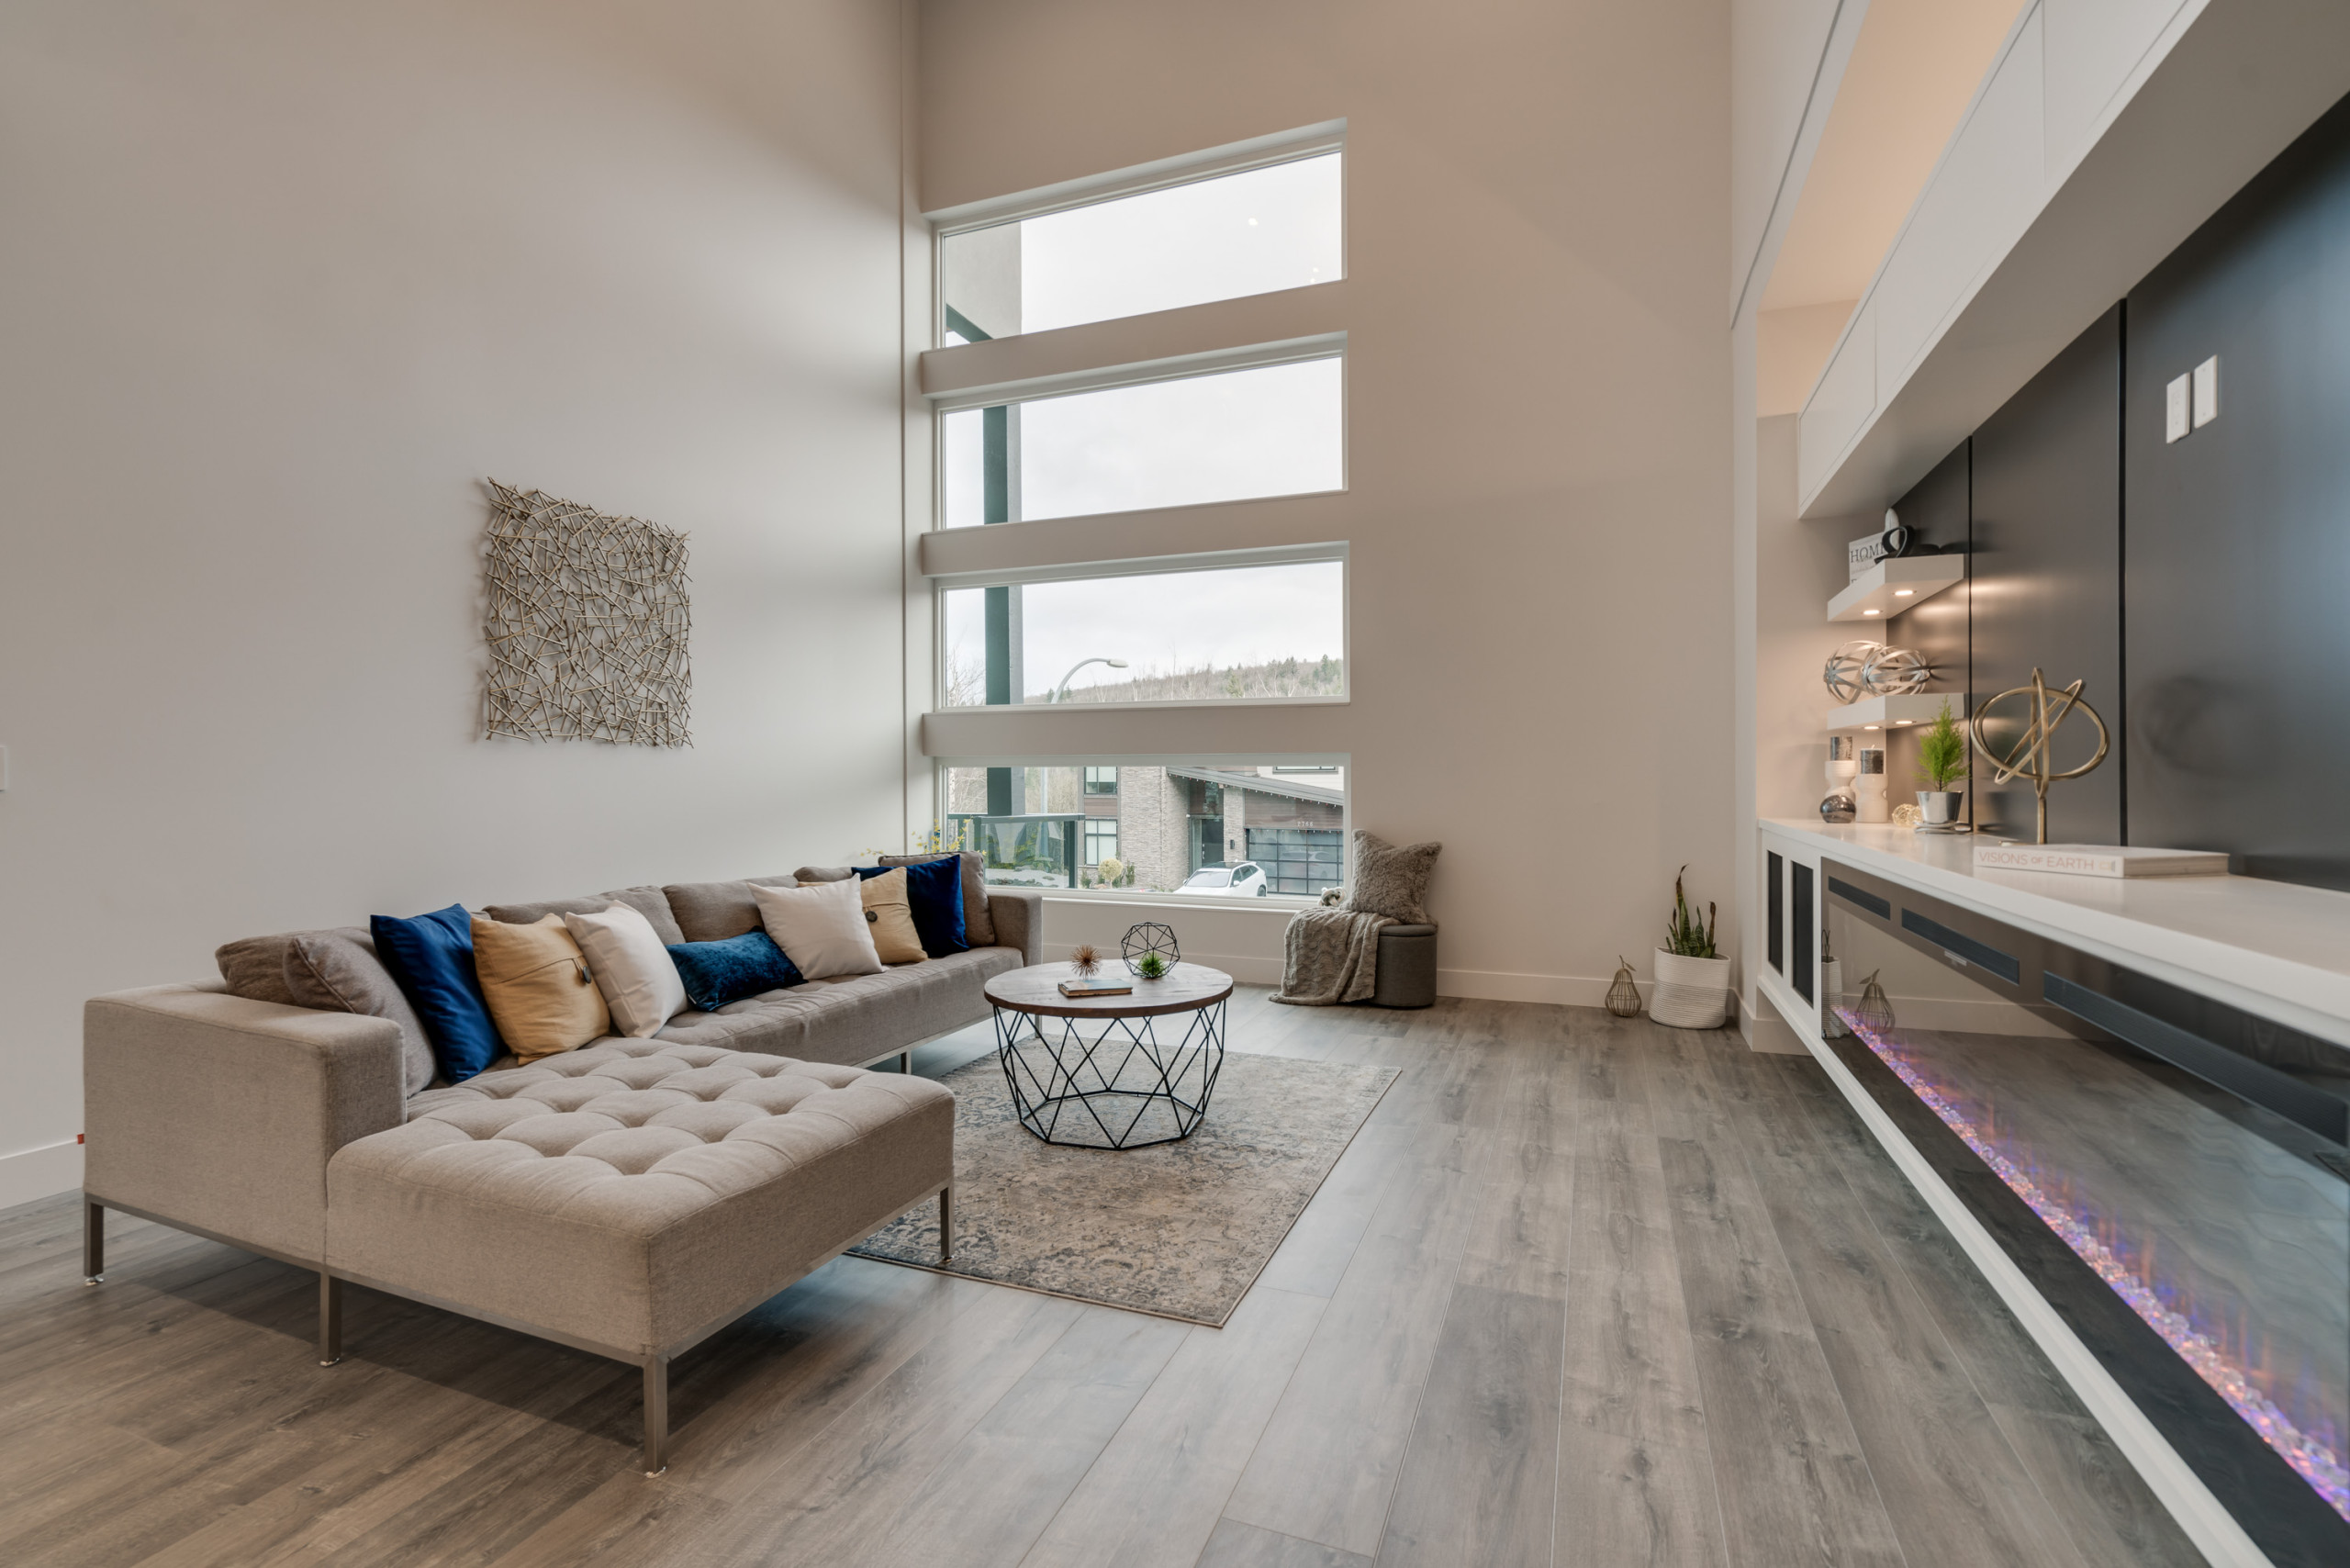 Contemporary Great Room with Large Windows & Fireplace - Contemporary -  Family Room - Vancouver - by Icon Projects Ltd. | Houzz